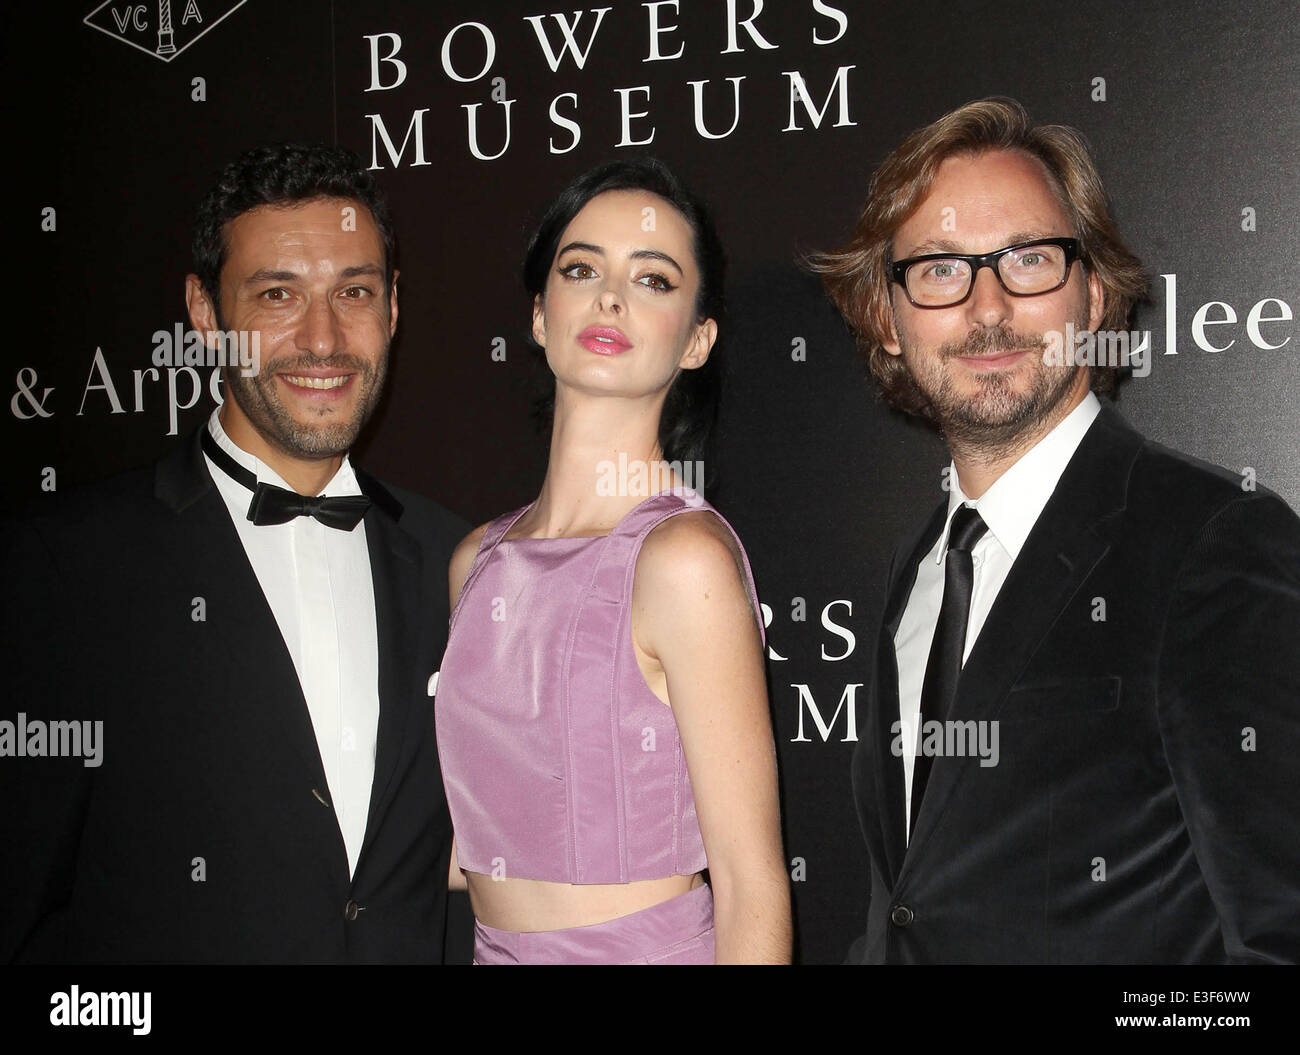 The Van Cleef & Arpels Bowers Museum Exhibit Gala Held at The Bowers ...